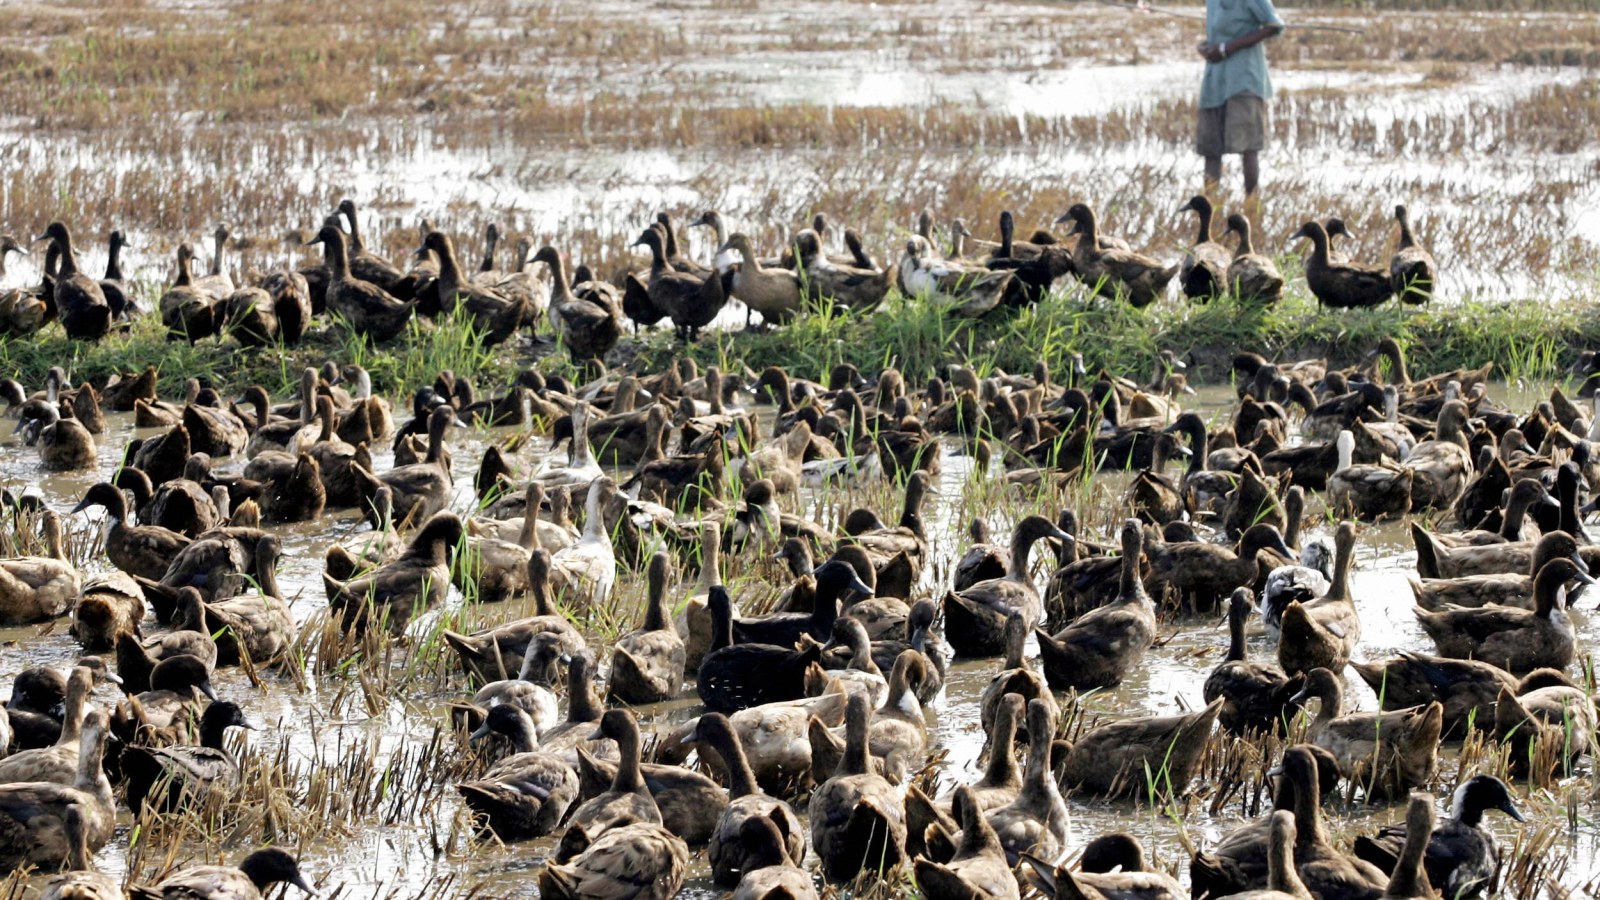 Watch This Army of Ducks Help a Farmer in Need